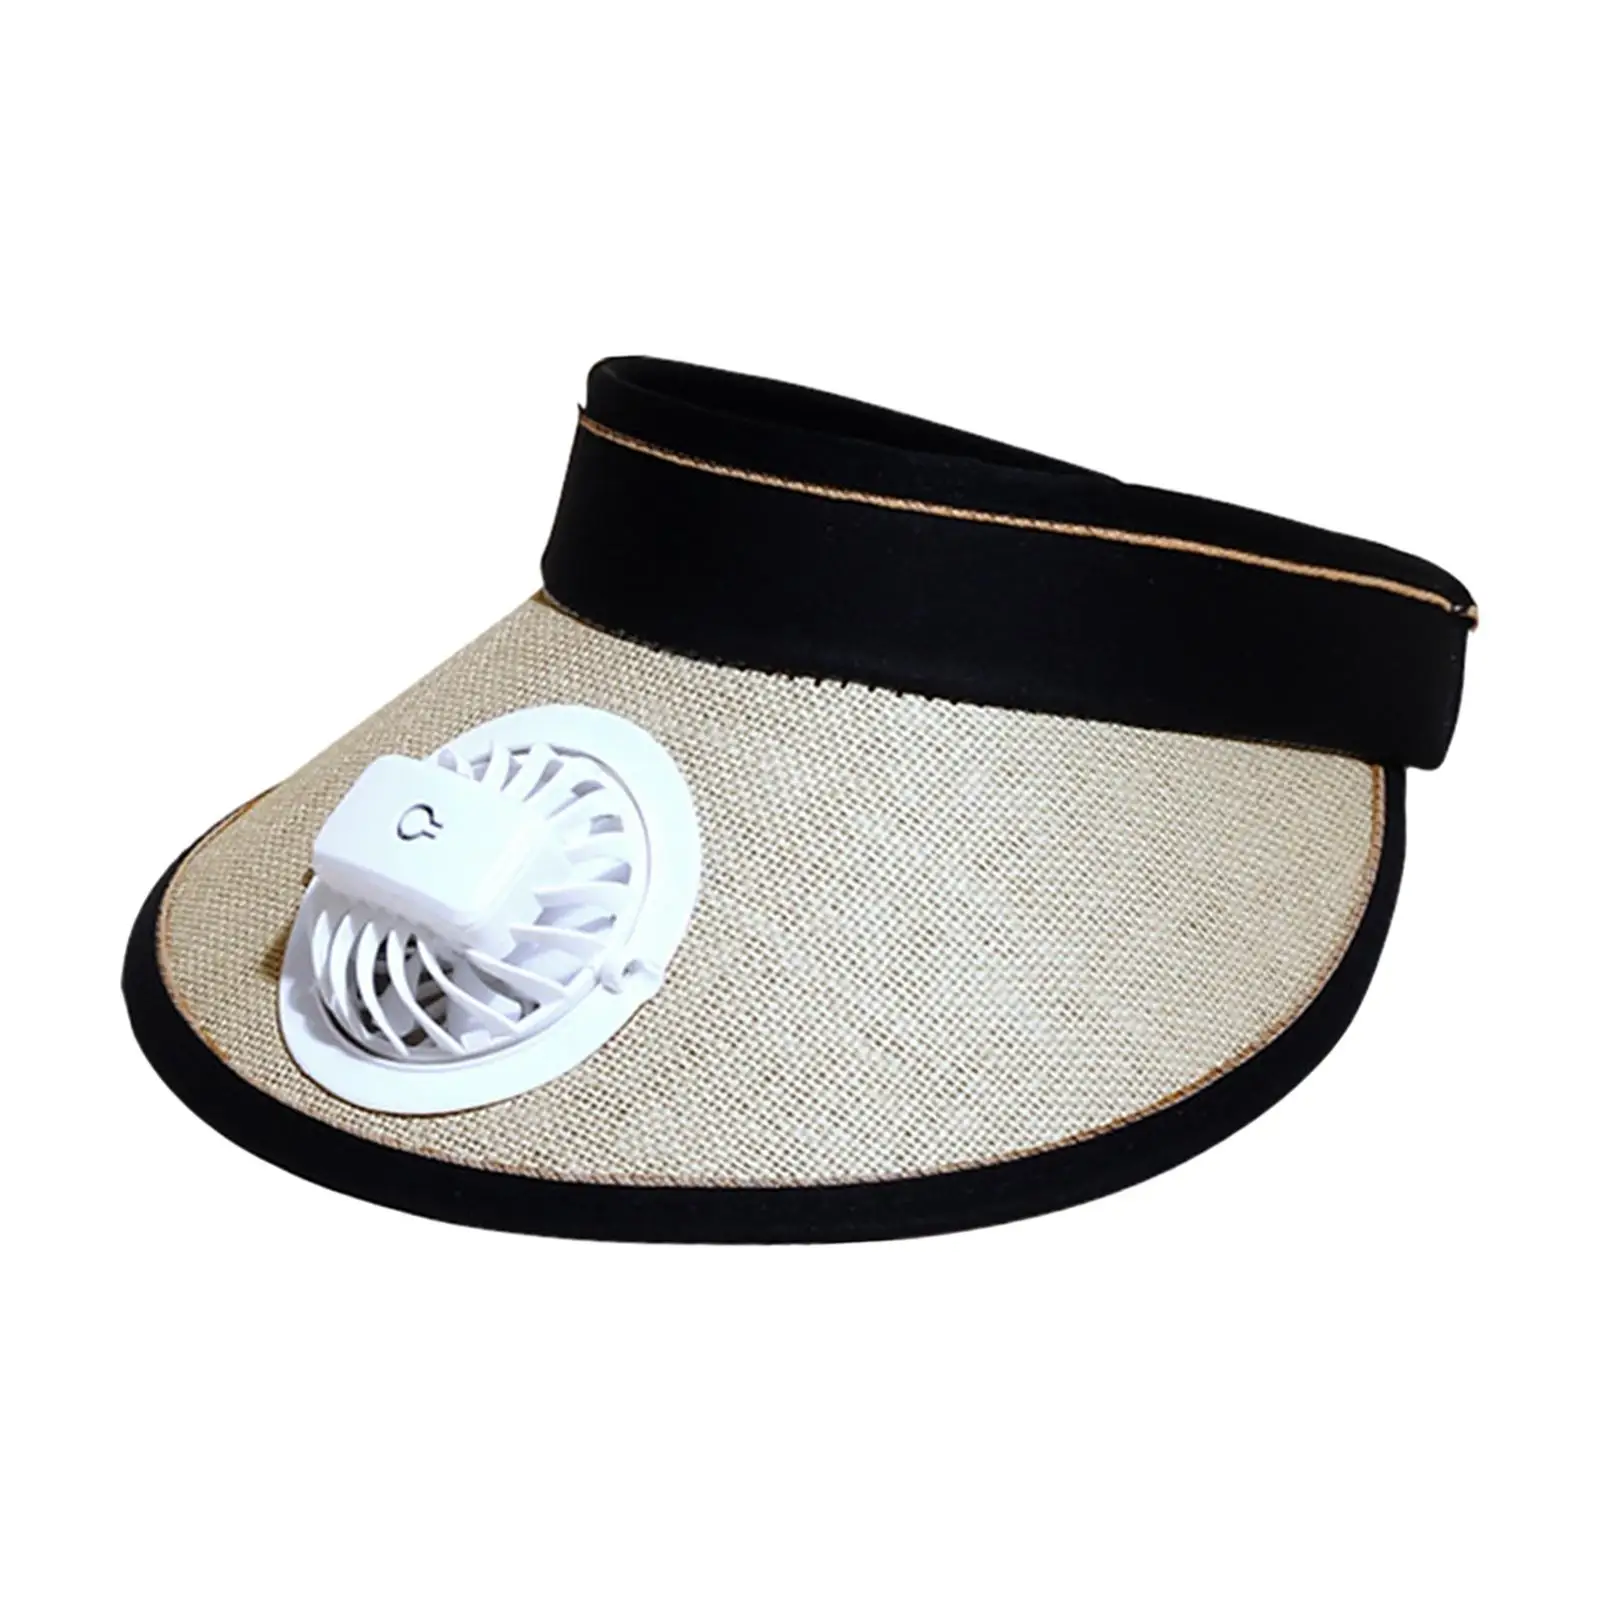 Women Sun Visor Hat with USB Fan Large Brim Multifunctional Adjustable Elastic Buckle Fishing Hat for Casual Everyday Wear